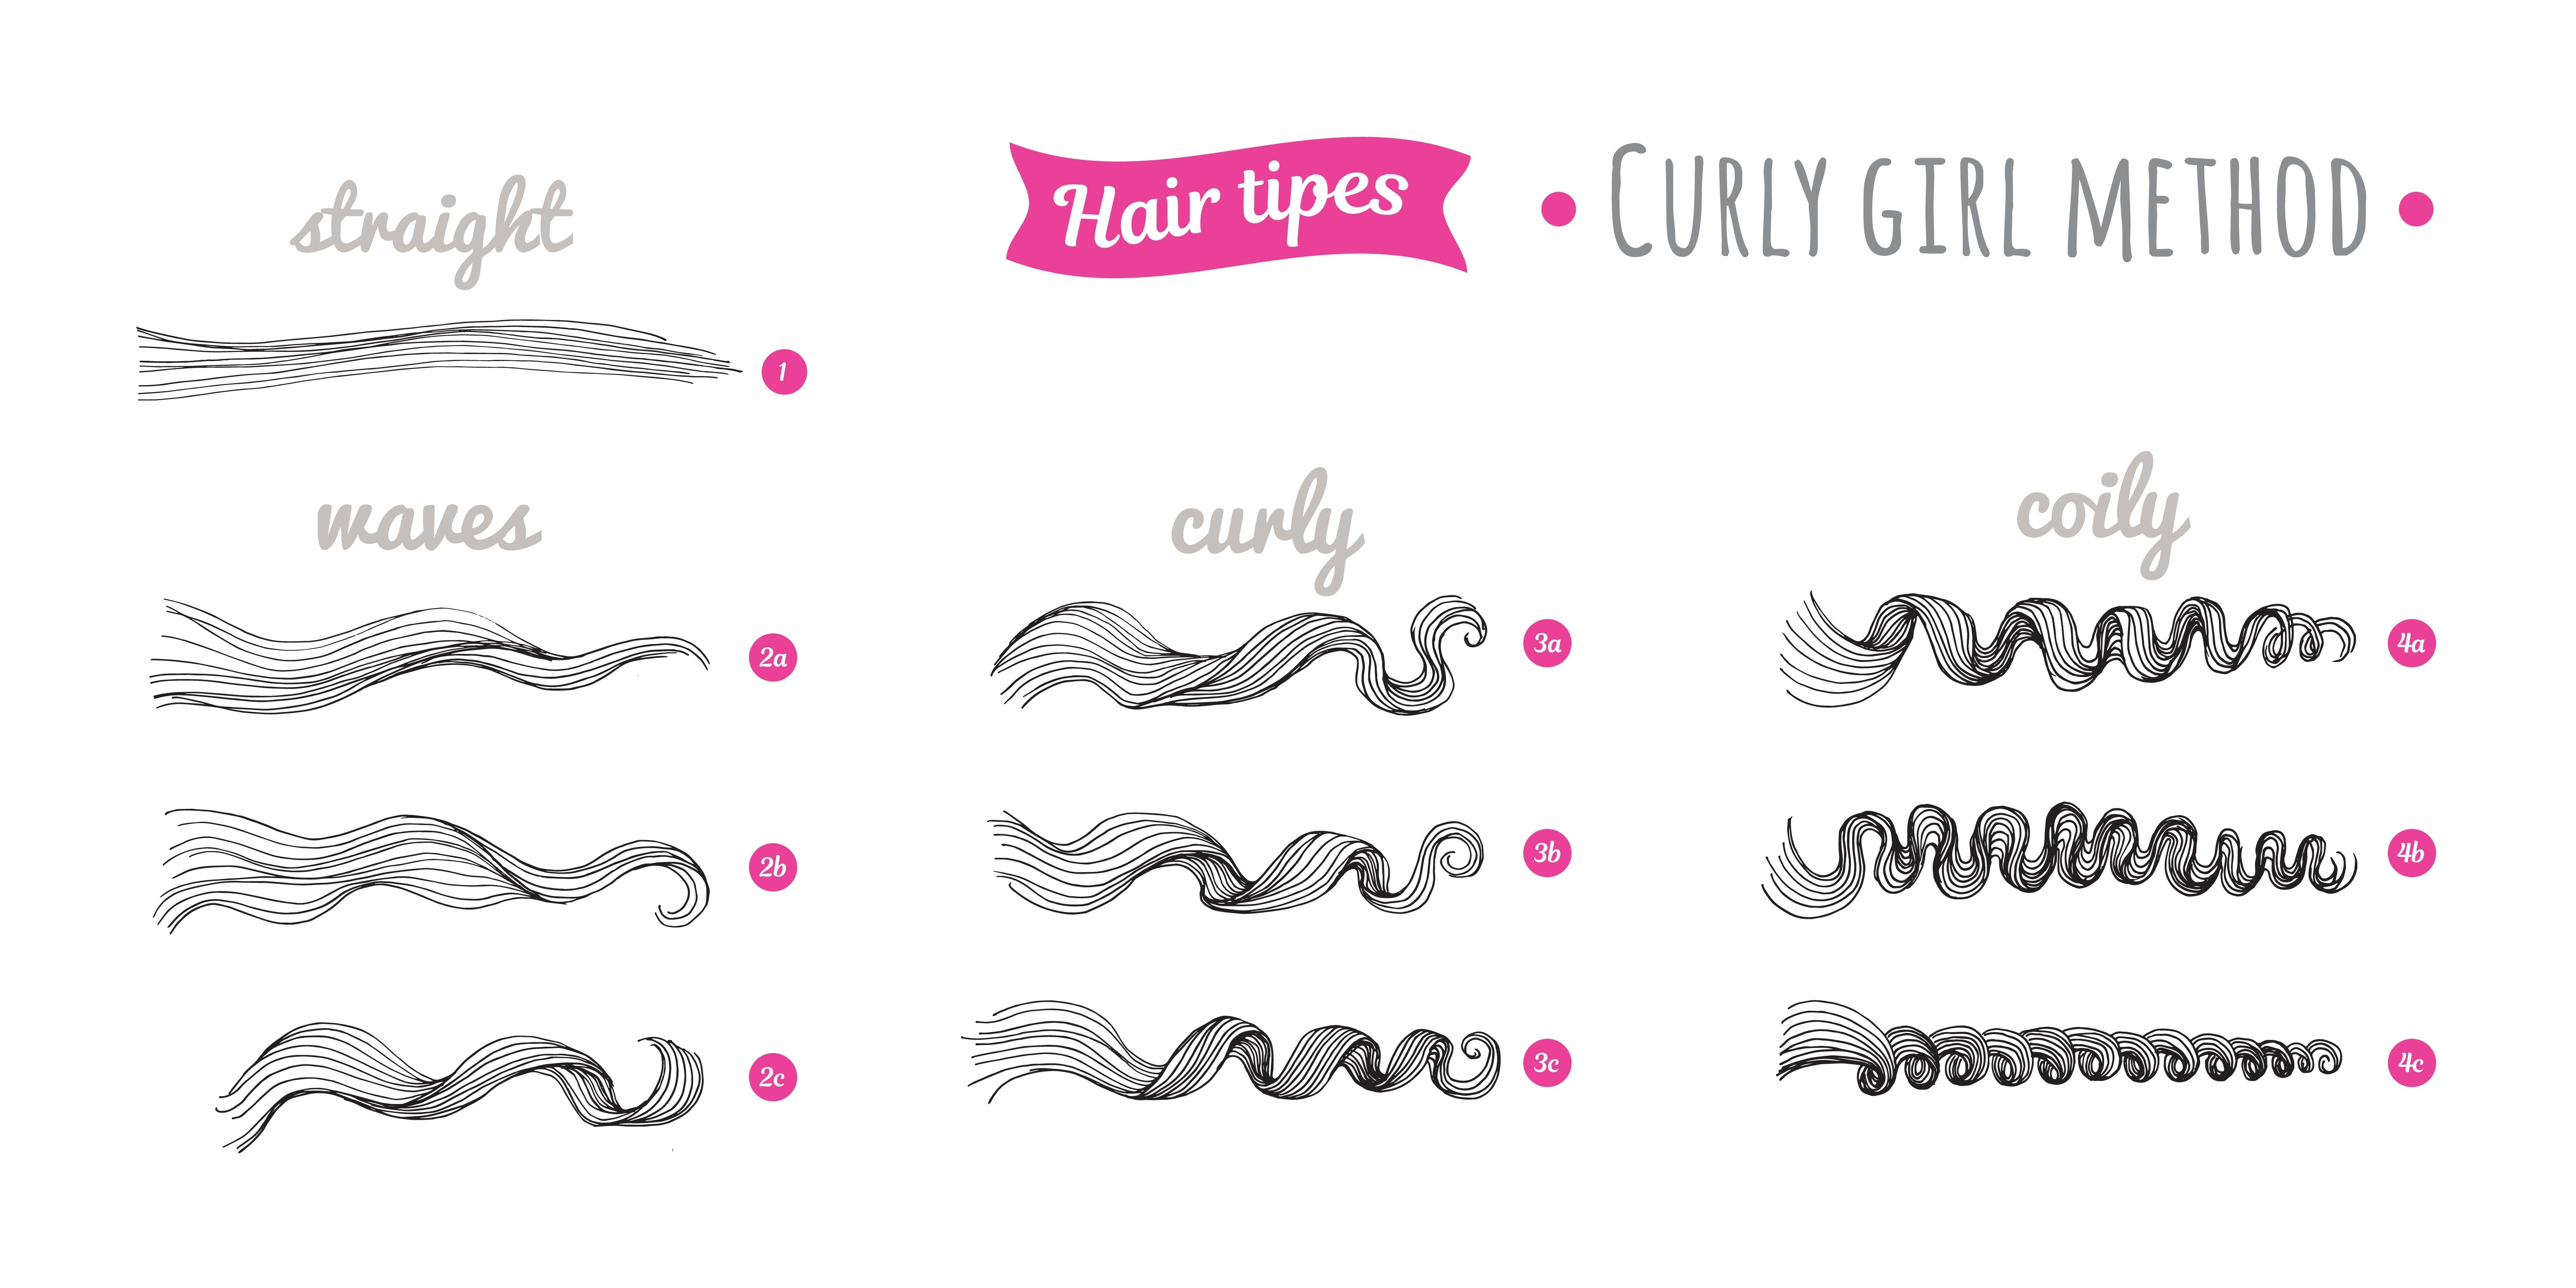 A variation of the hair pattern chart | Source: Shutterstock